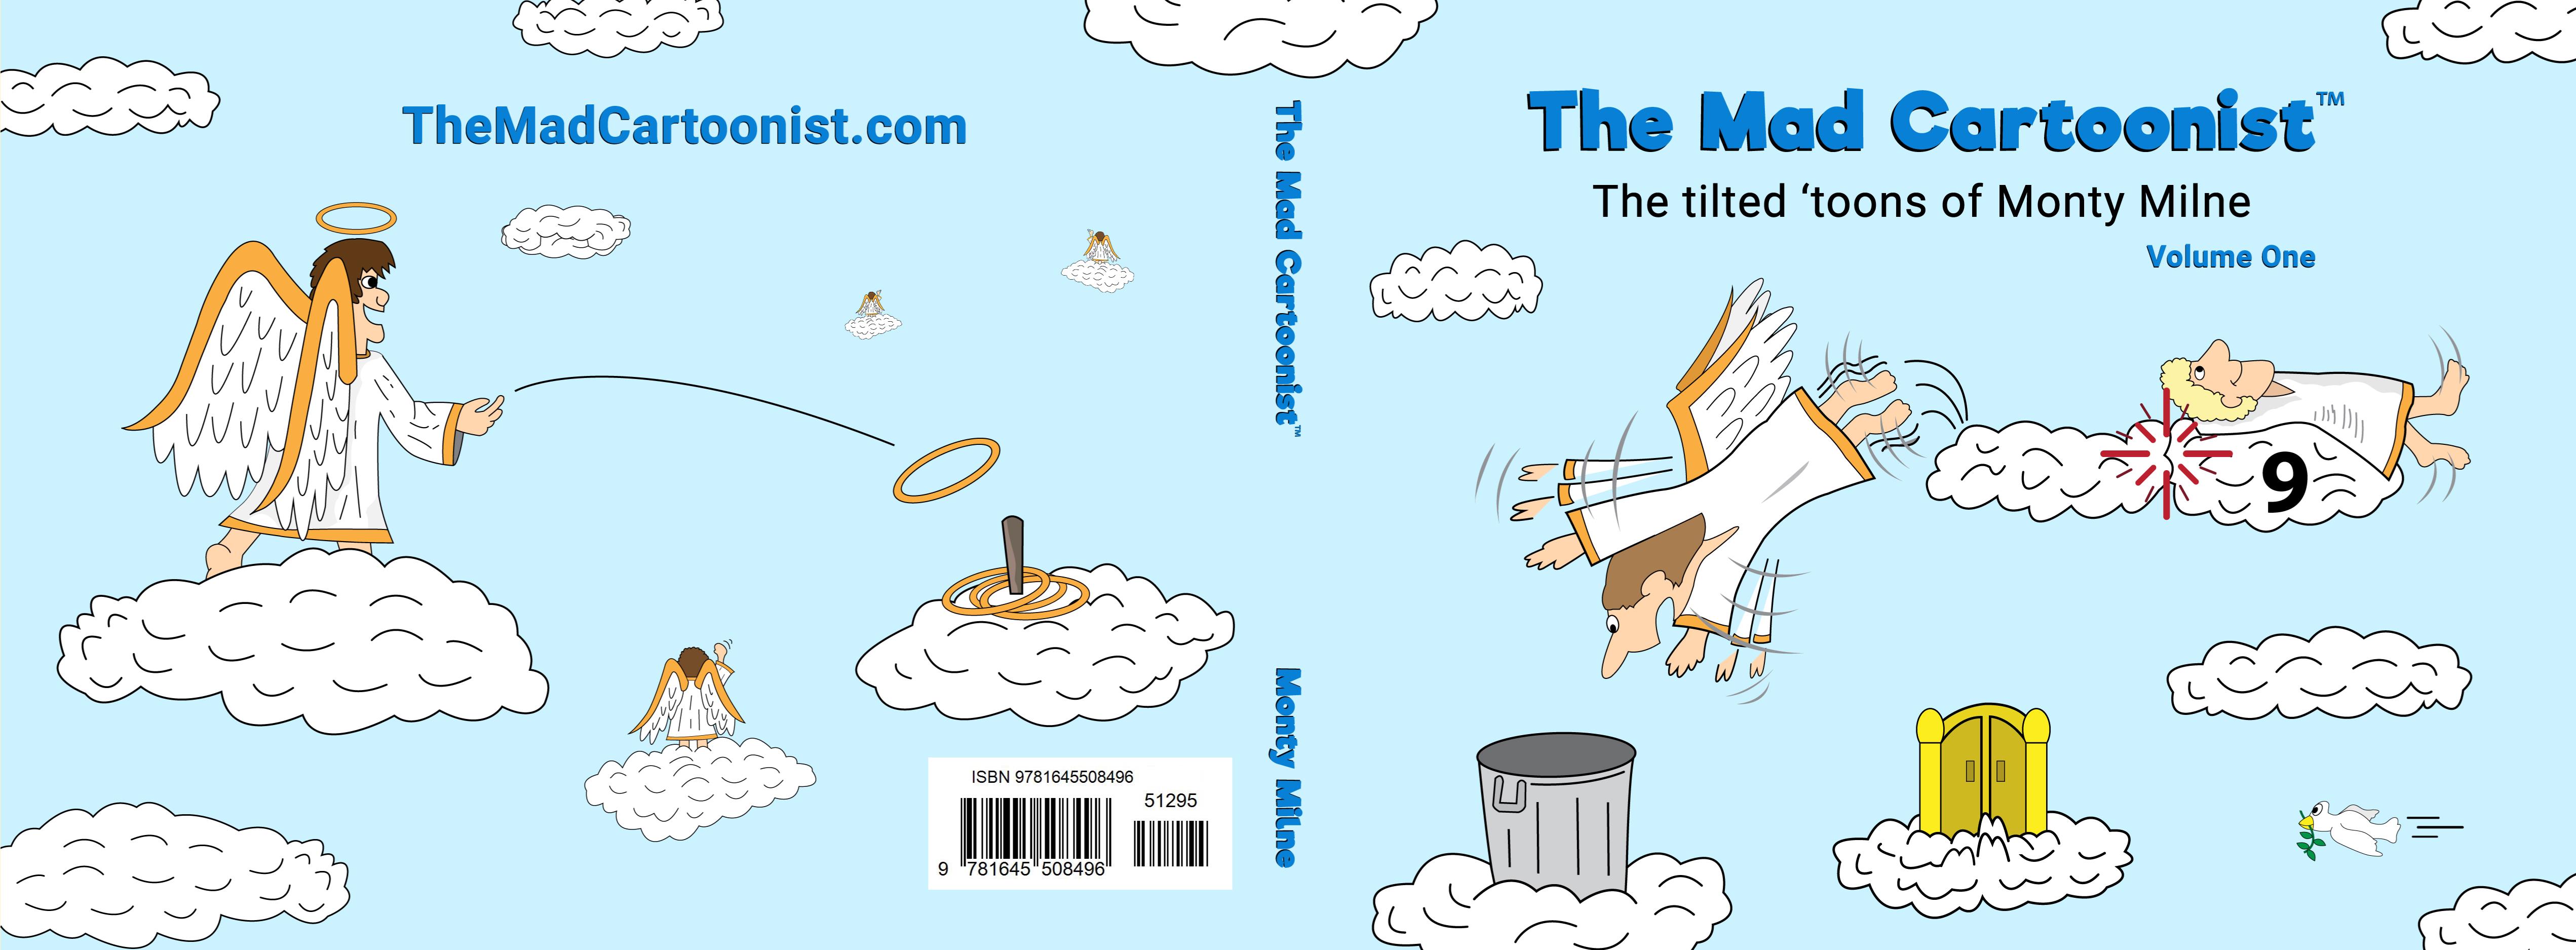 The Mad Cartoonist cover image